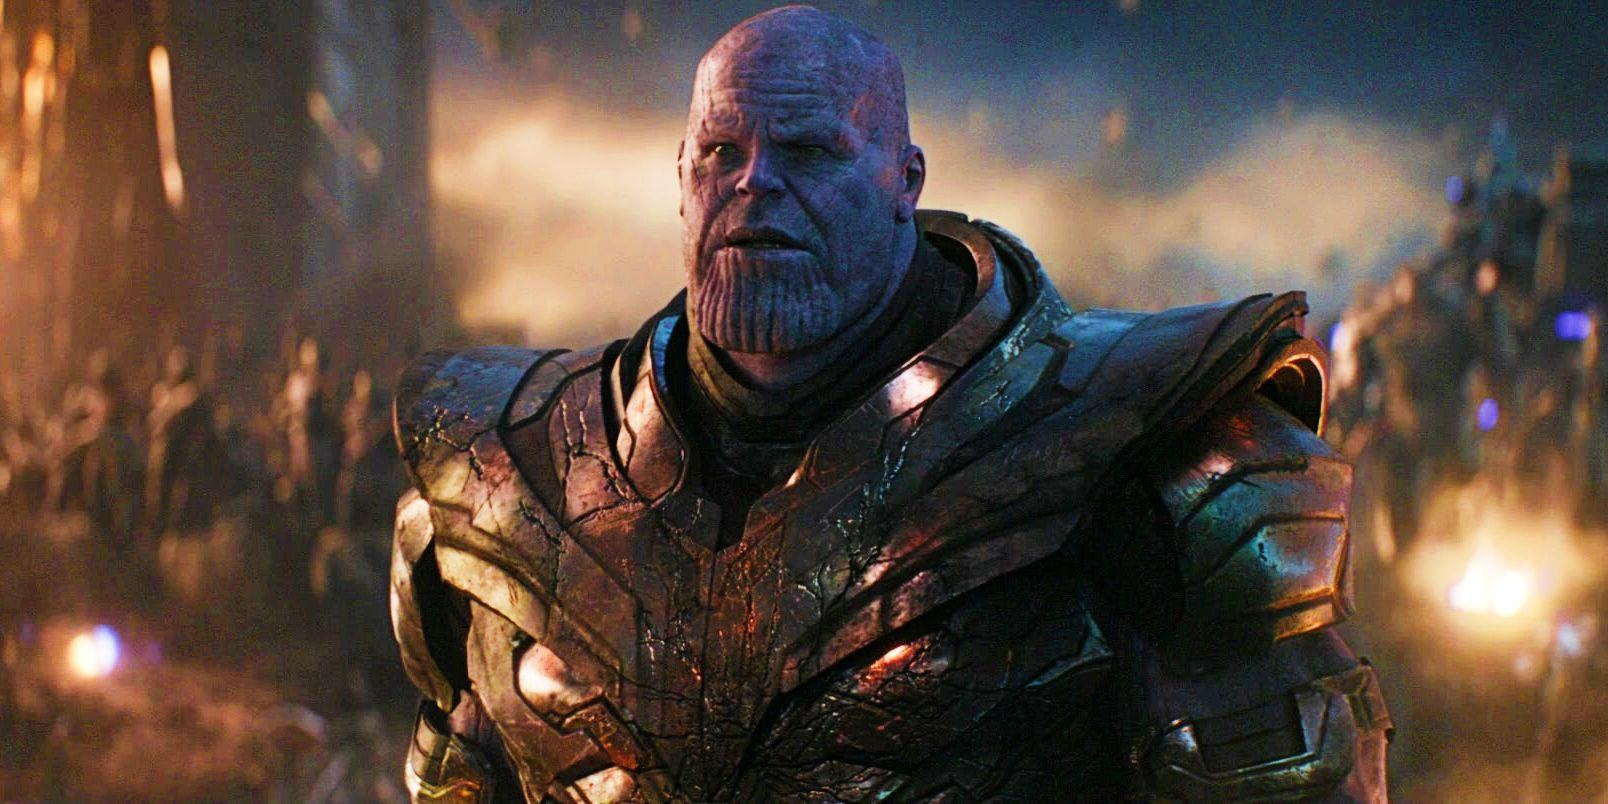 Thanos stands in front of the army in Avengers Endgame